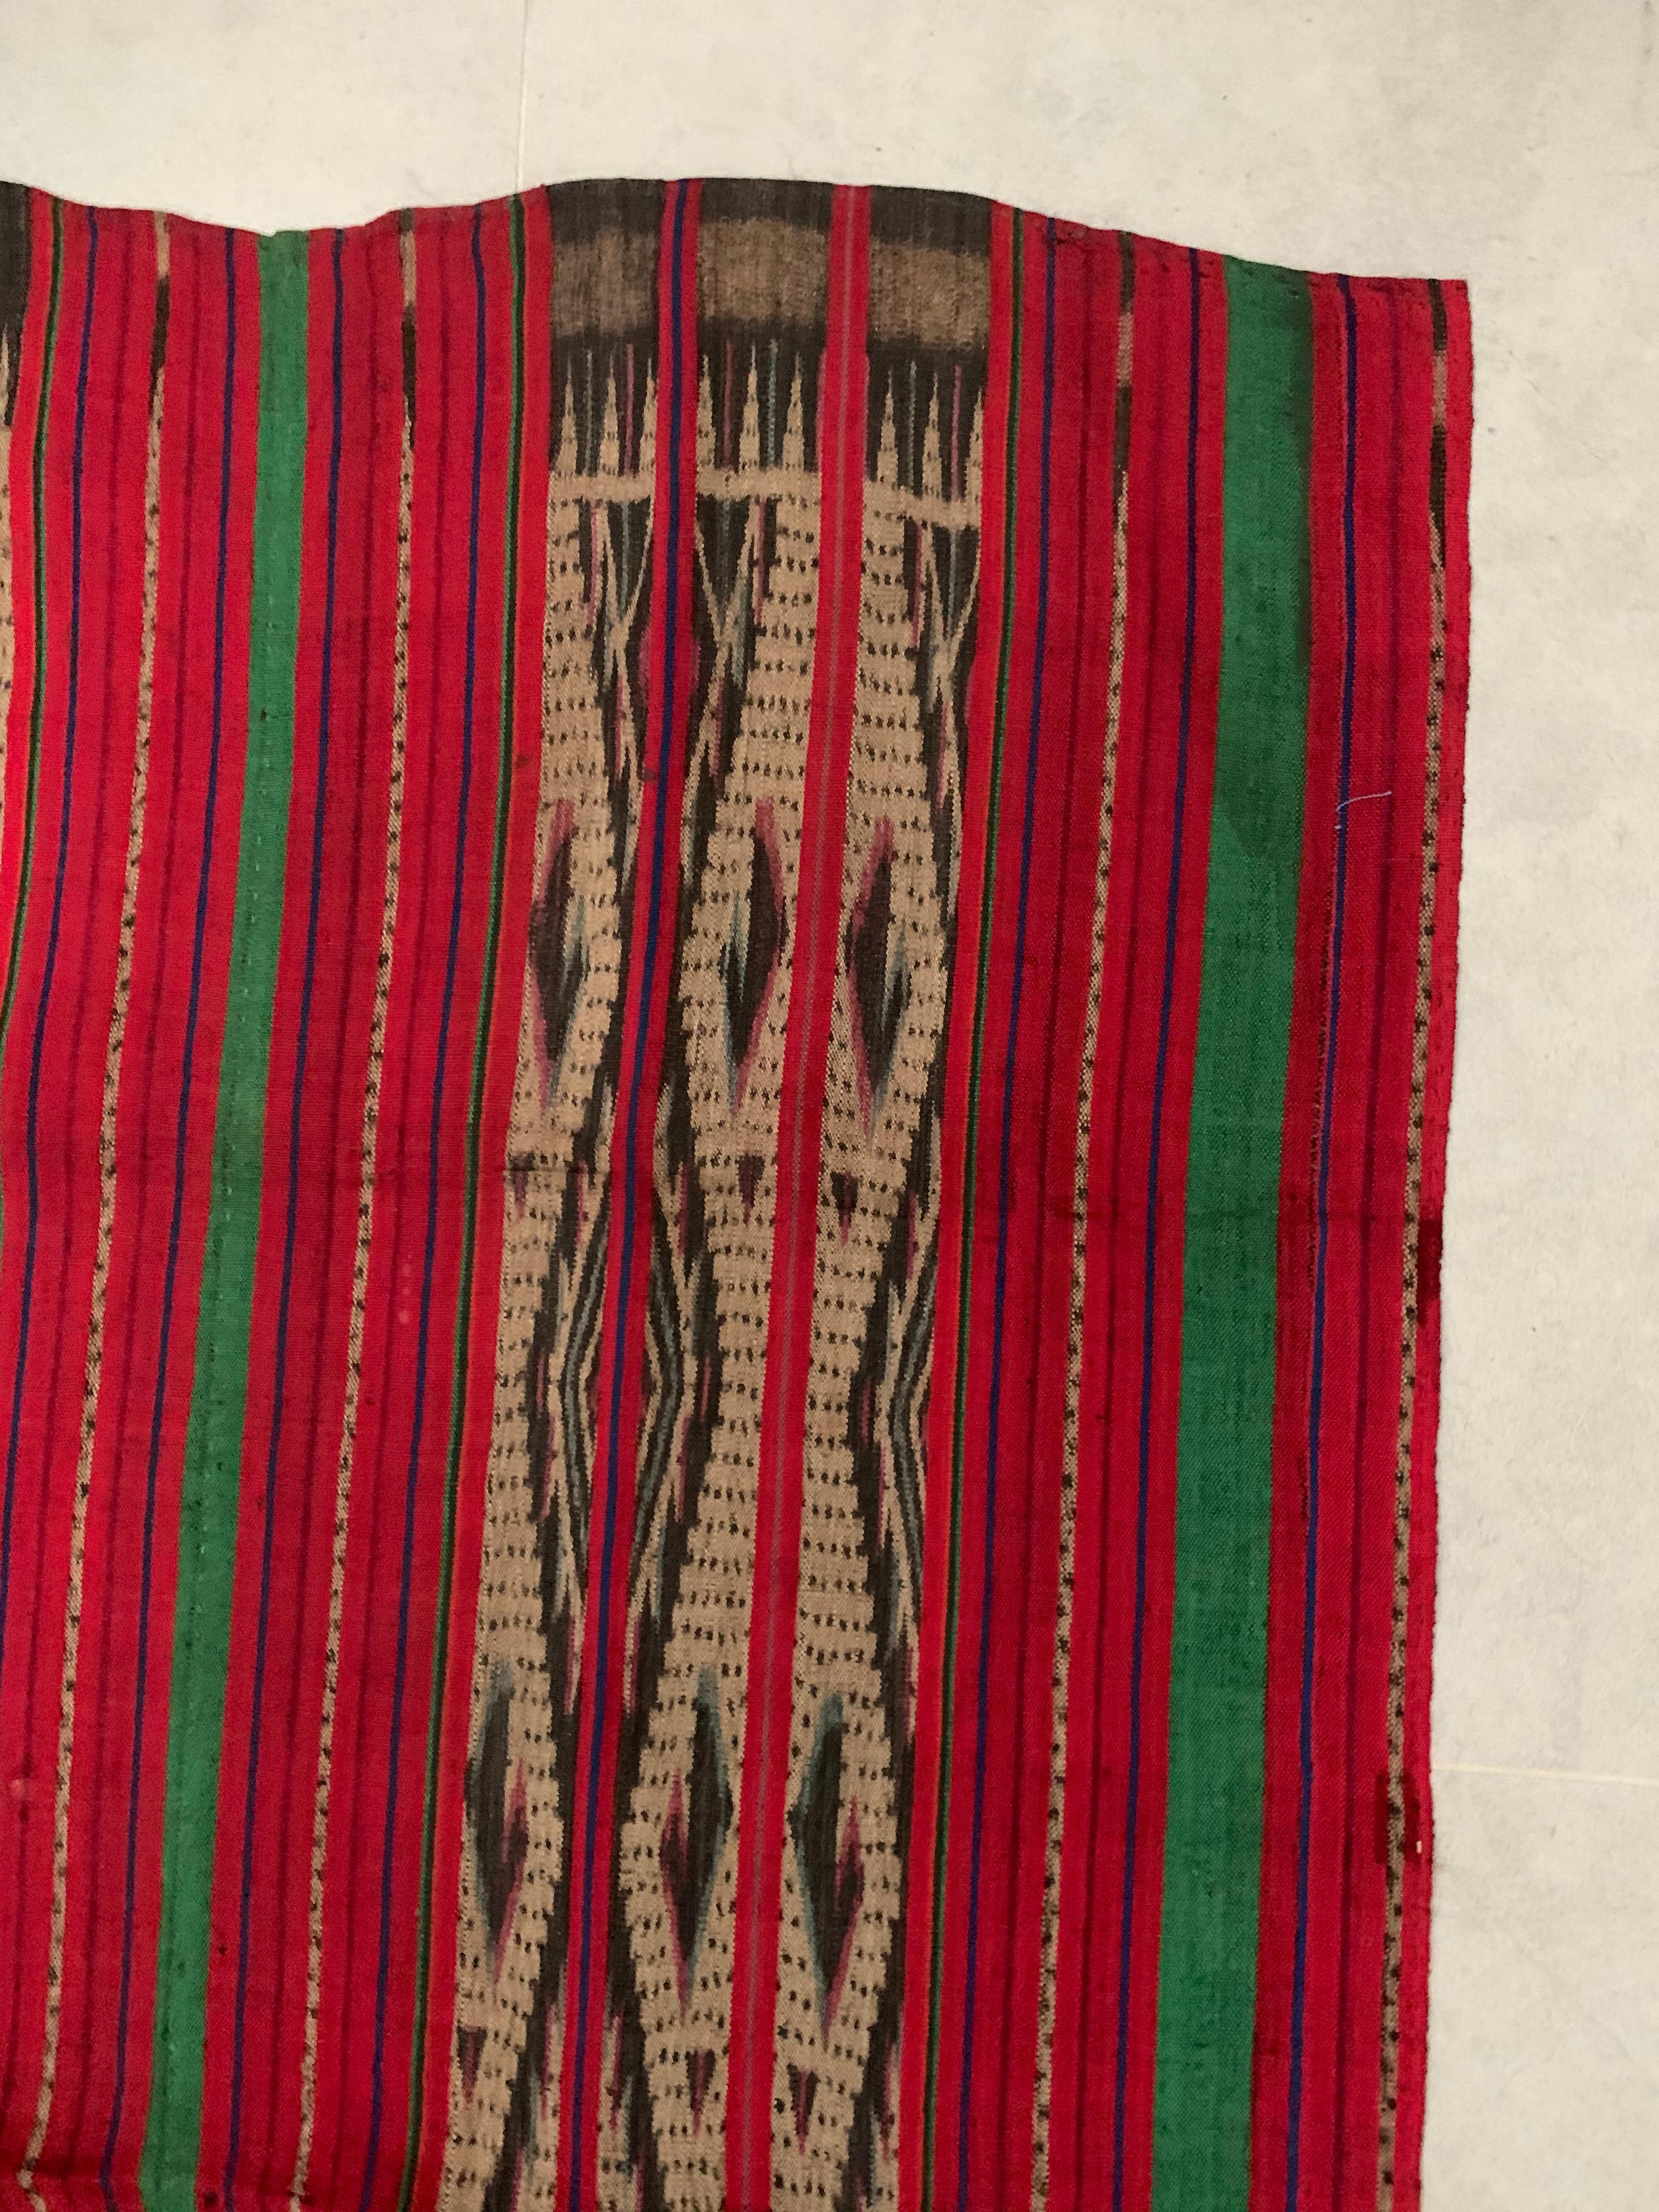 Yarn Ikat Textile from Dayak Tribe, Kalimantan, Indonesia For Sale